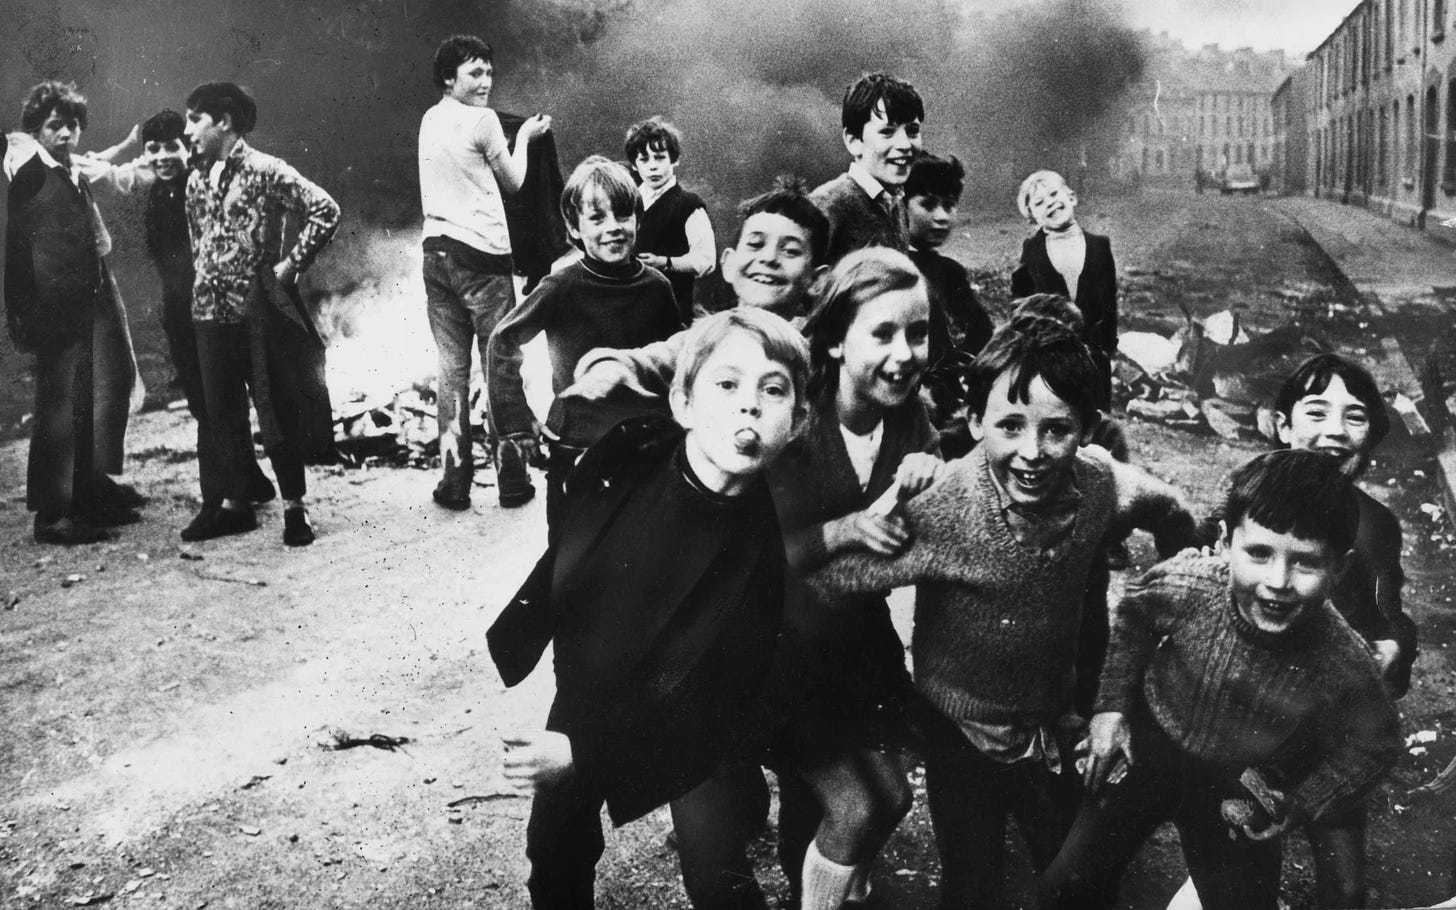 Northern Ireland Troubles pictures, conflict photos | IrishCentral.com